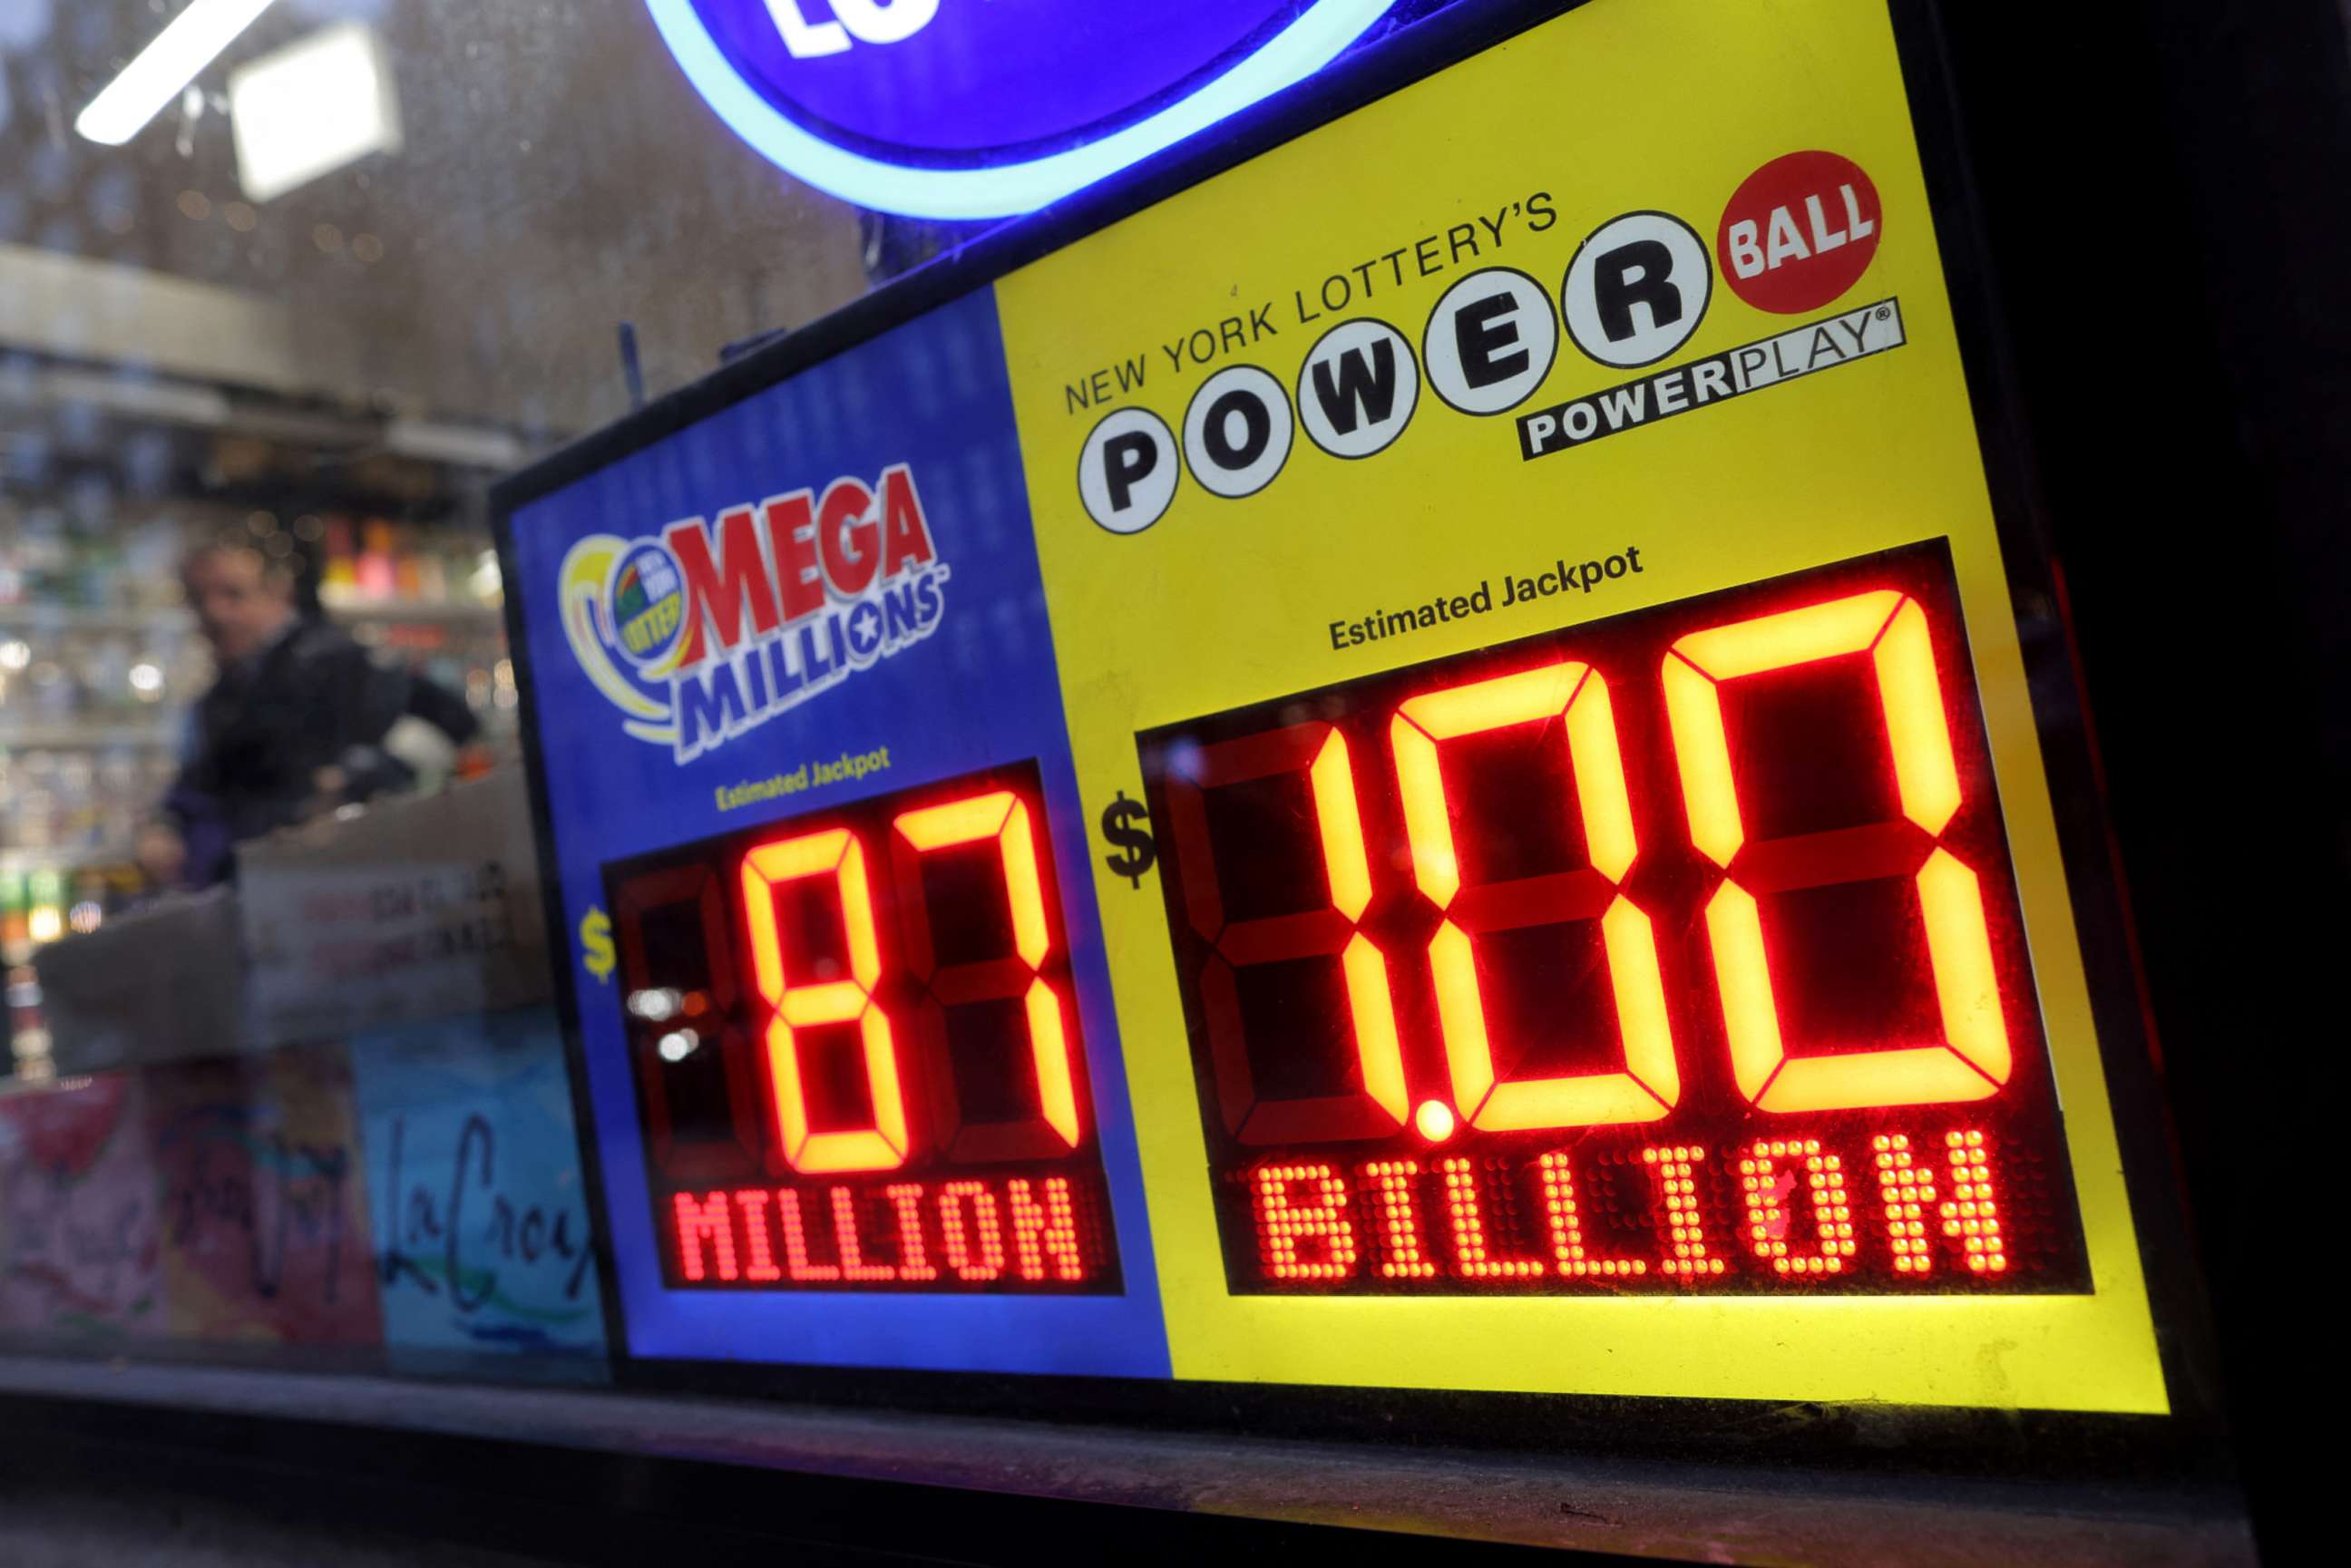 PHOTO: The Powerball jackpot of 1 billion dollars is advertised in a store in New York City, Oct. 31, 2022.